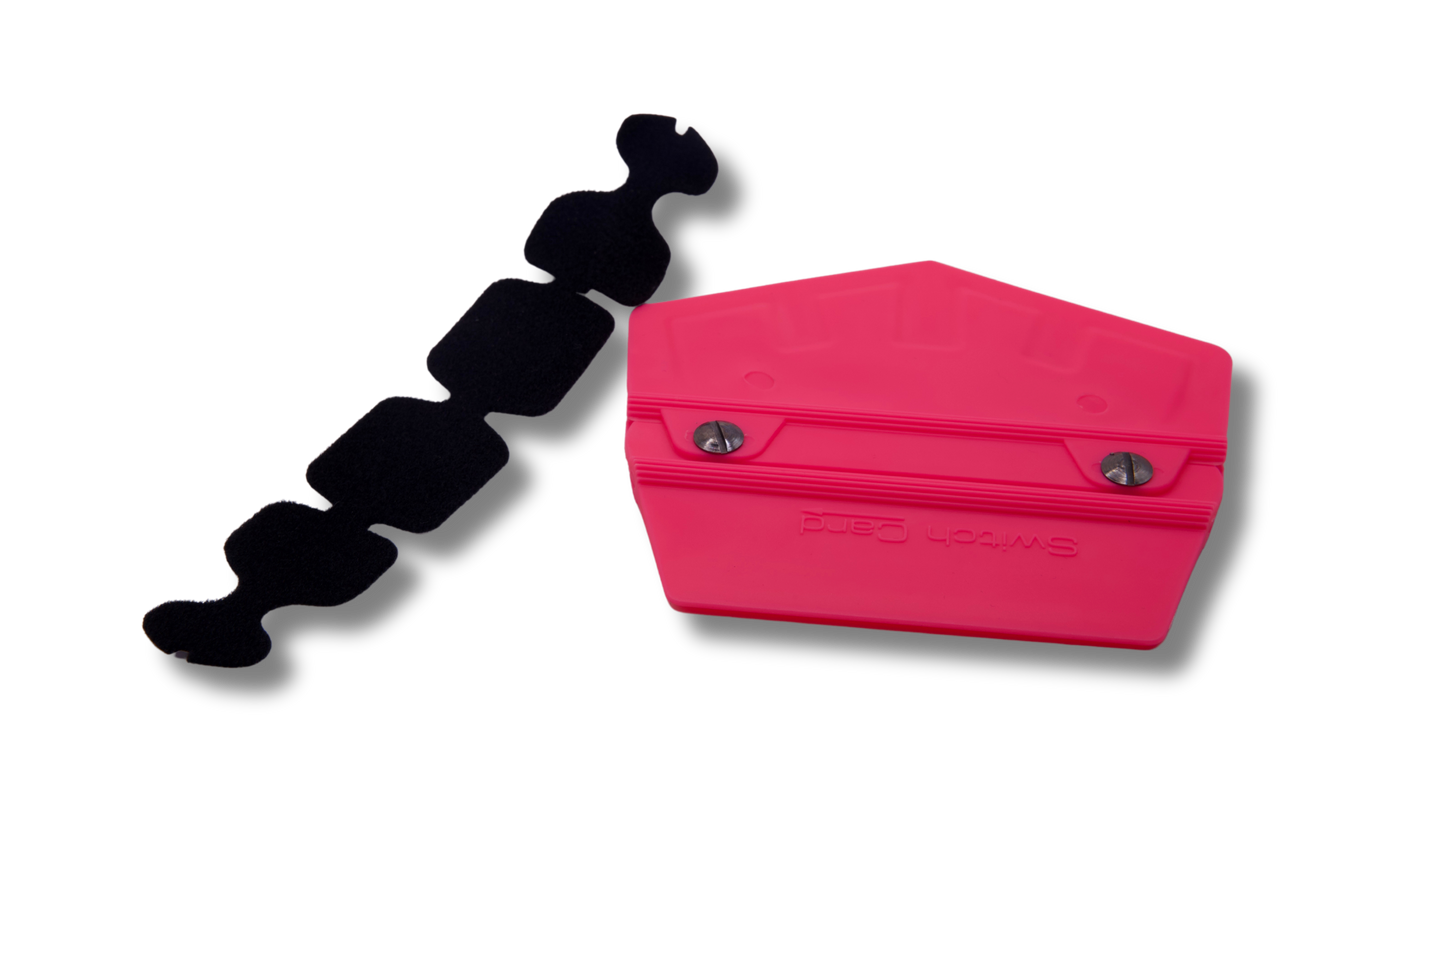 Ergonomic and precise Pink Switch Squeegee D for car wrap applications.